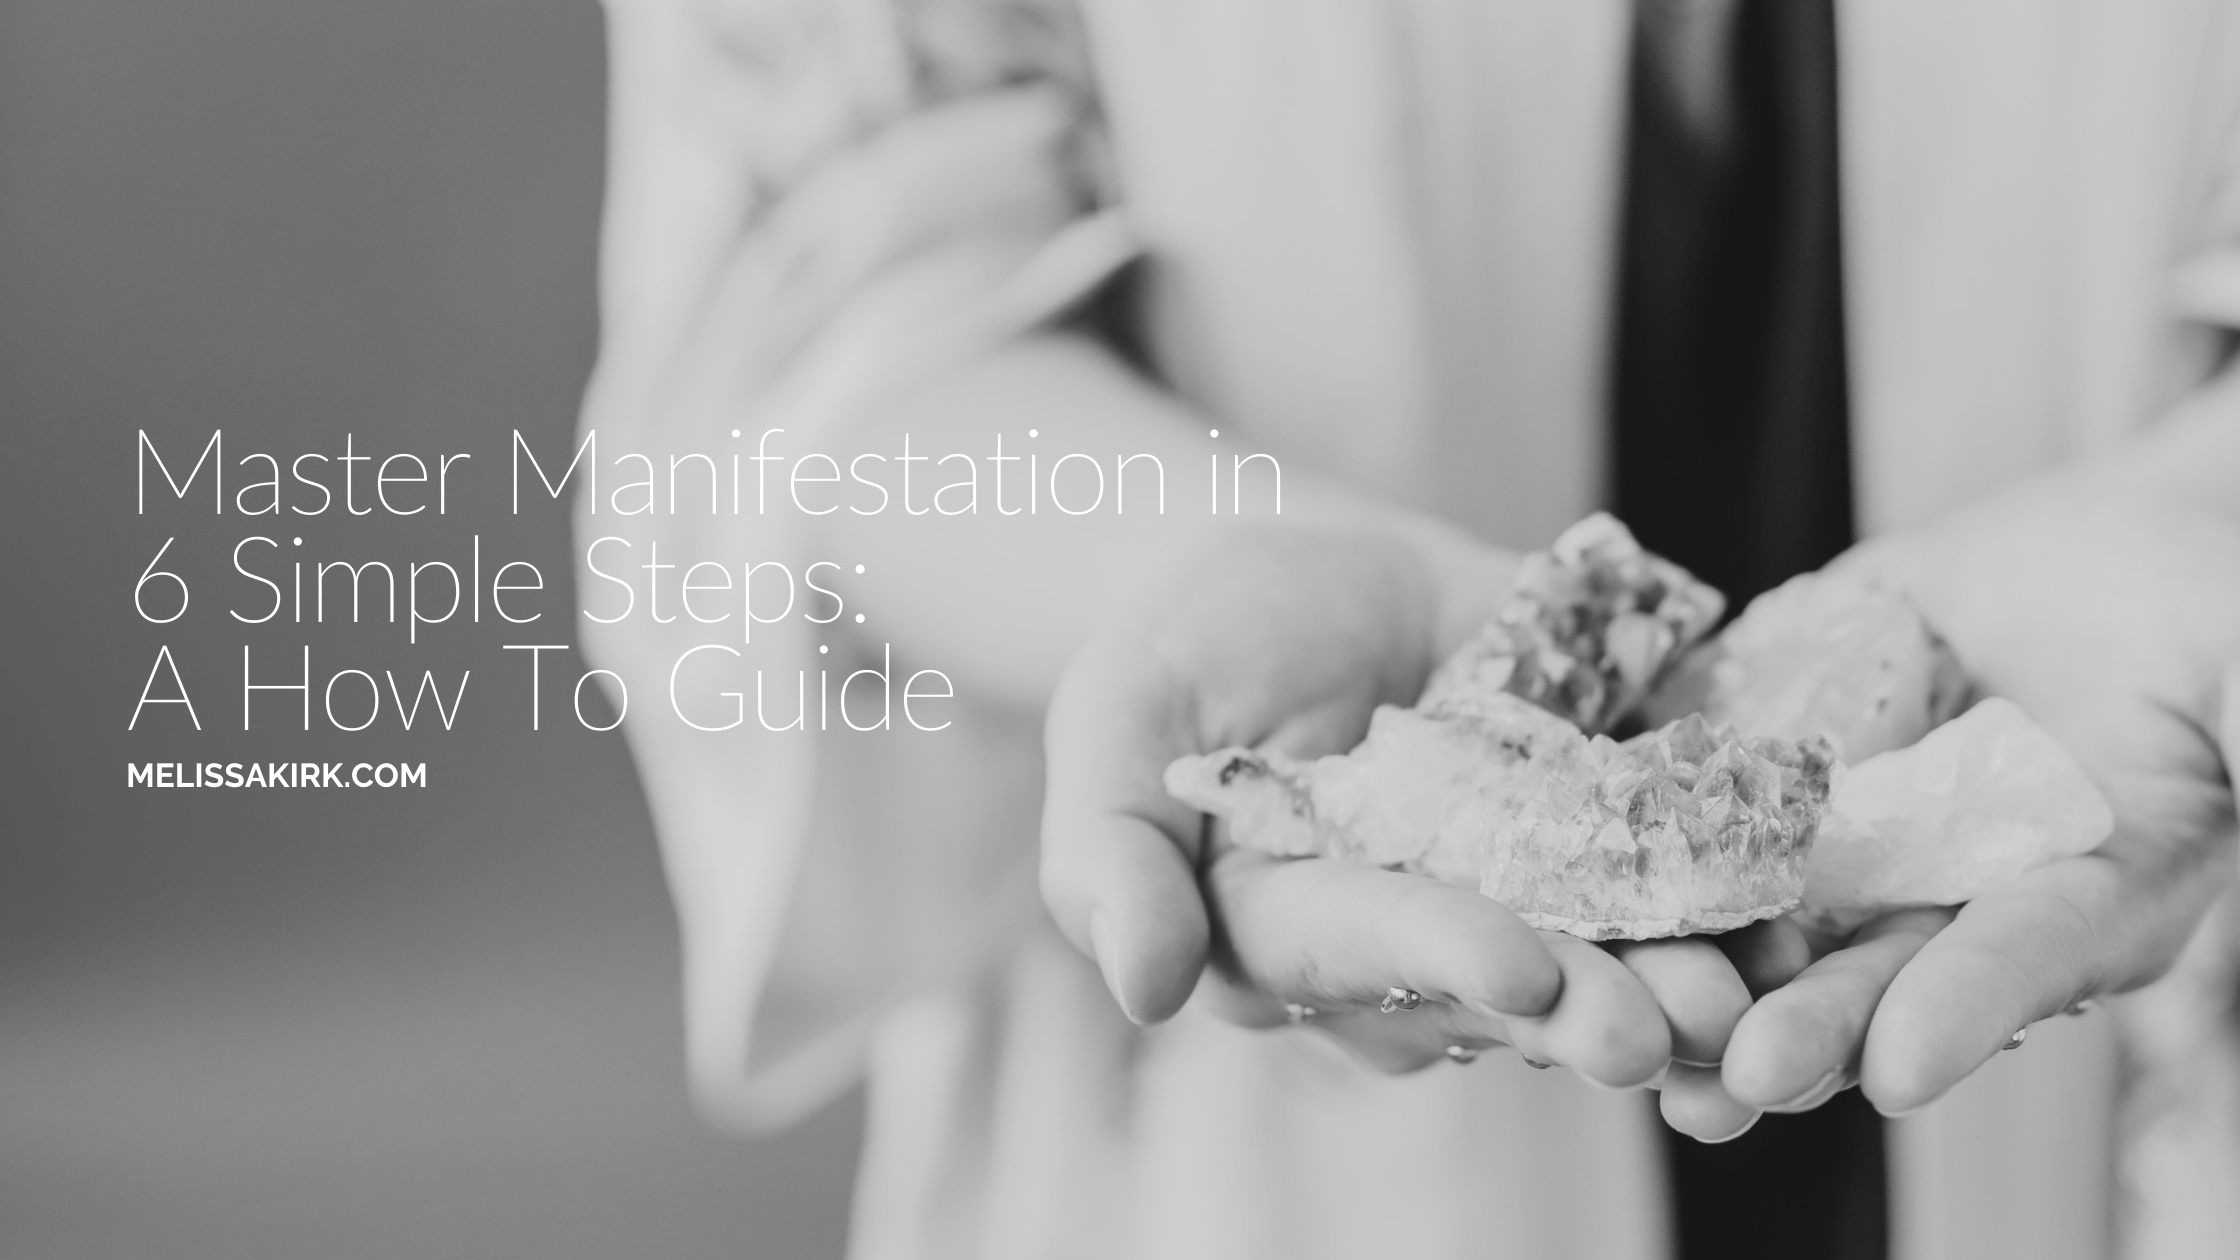 Master Manifestation in Six Simple Steps: A How To Guide